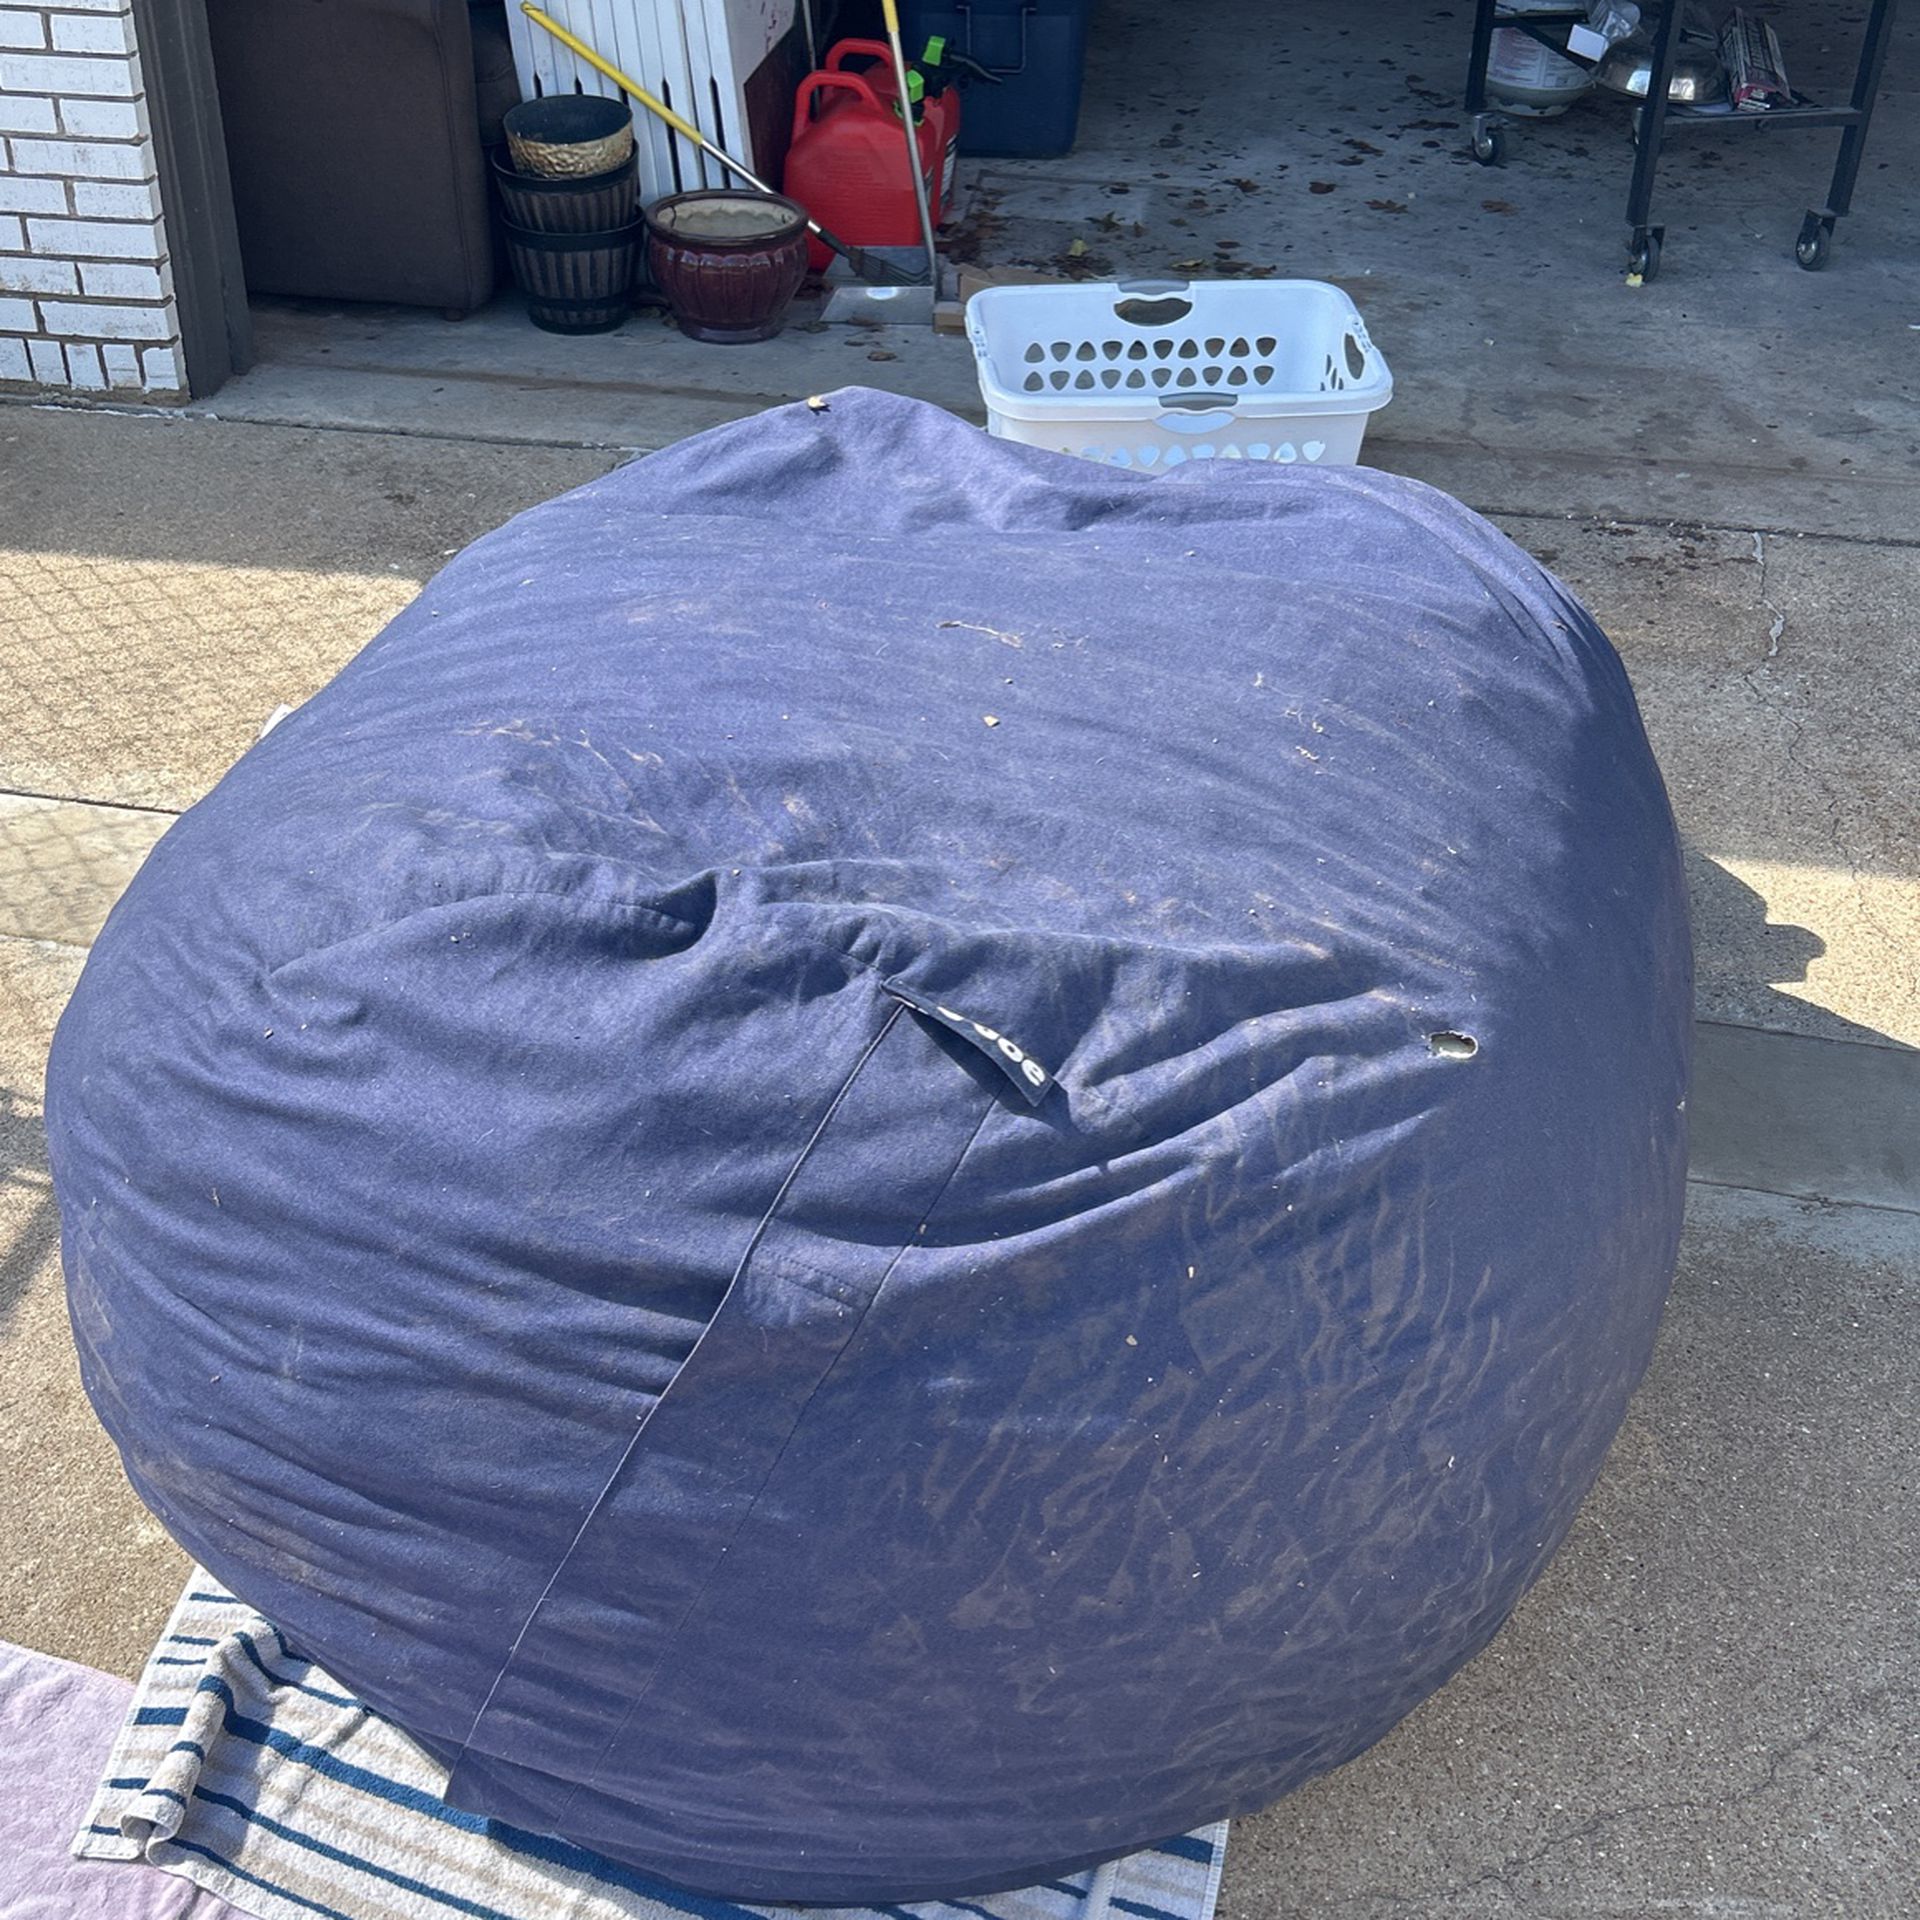 Big joe beanbag chair. Cheapest you can get them new is $185